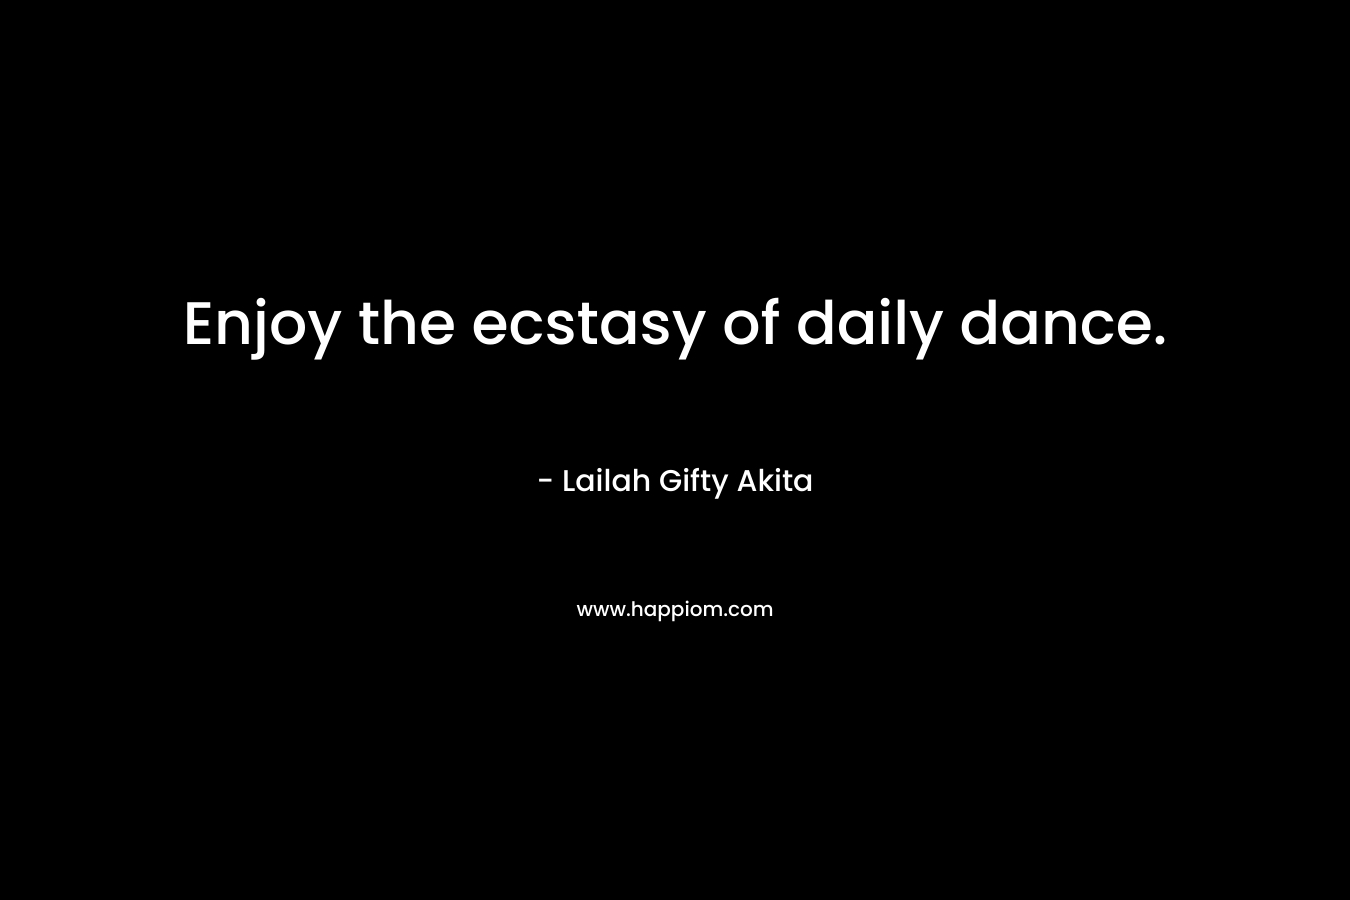 Enjoy the ecstasy of daily dance.